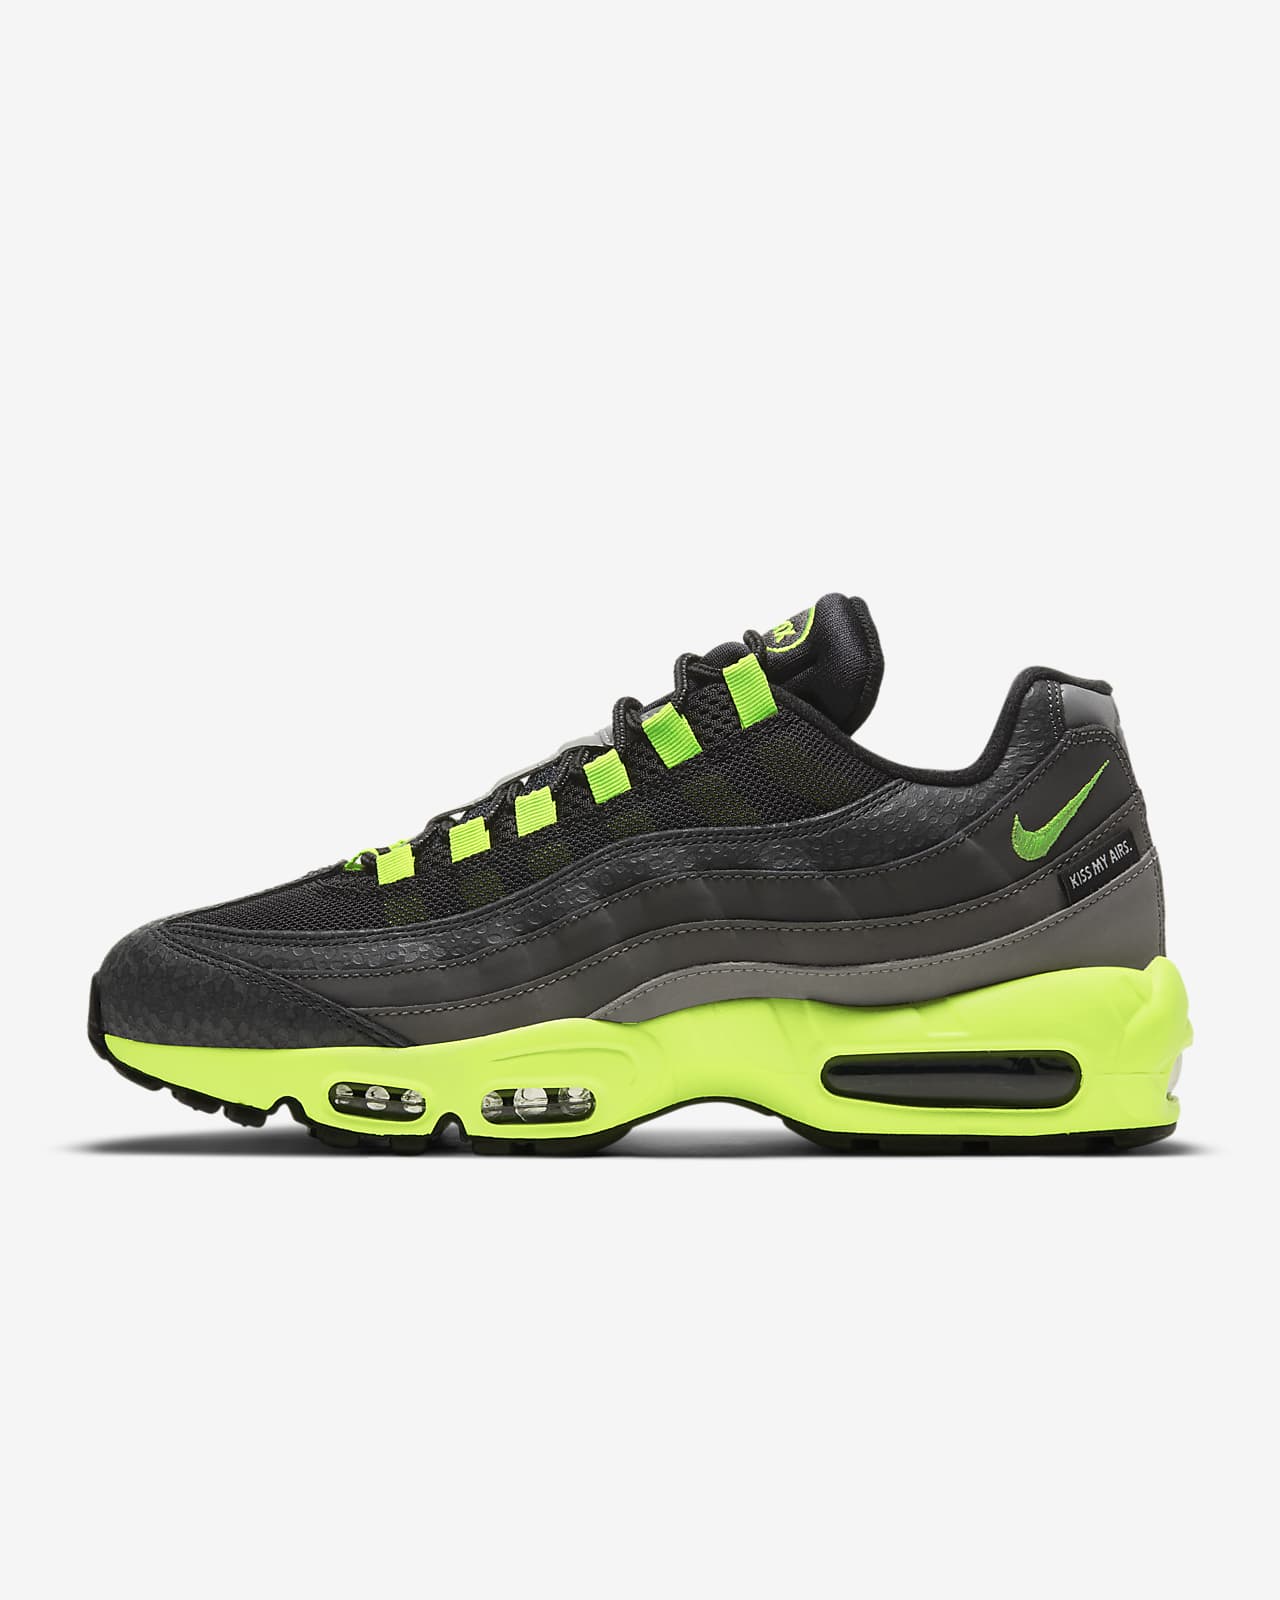 air max 95 good for running